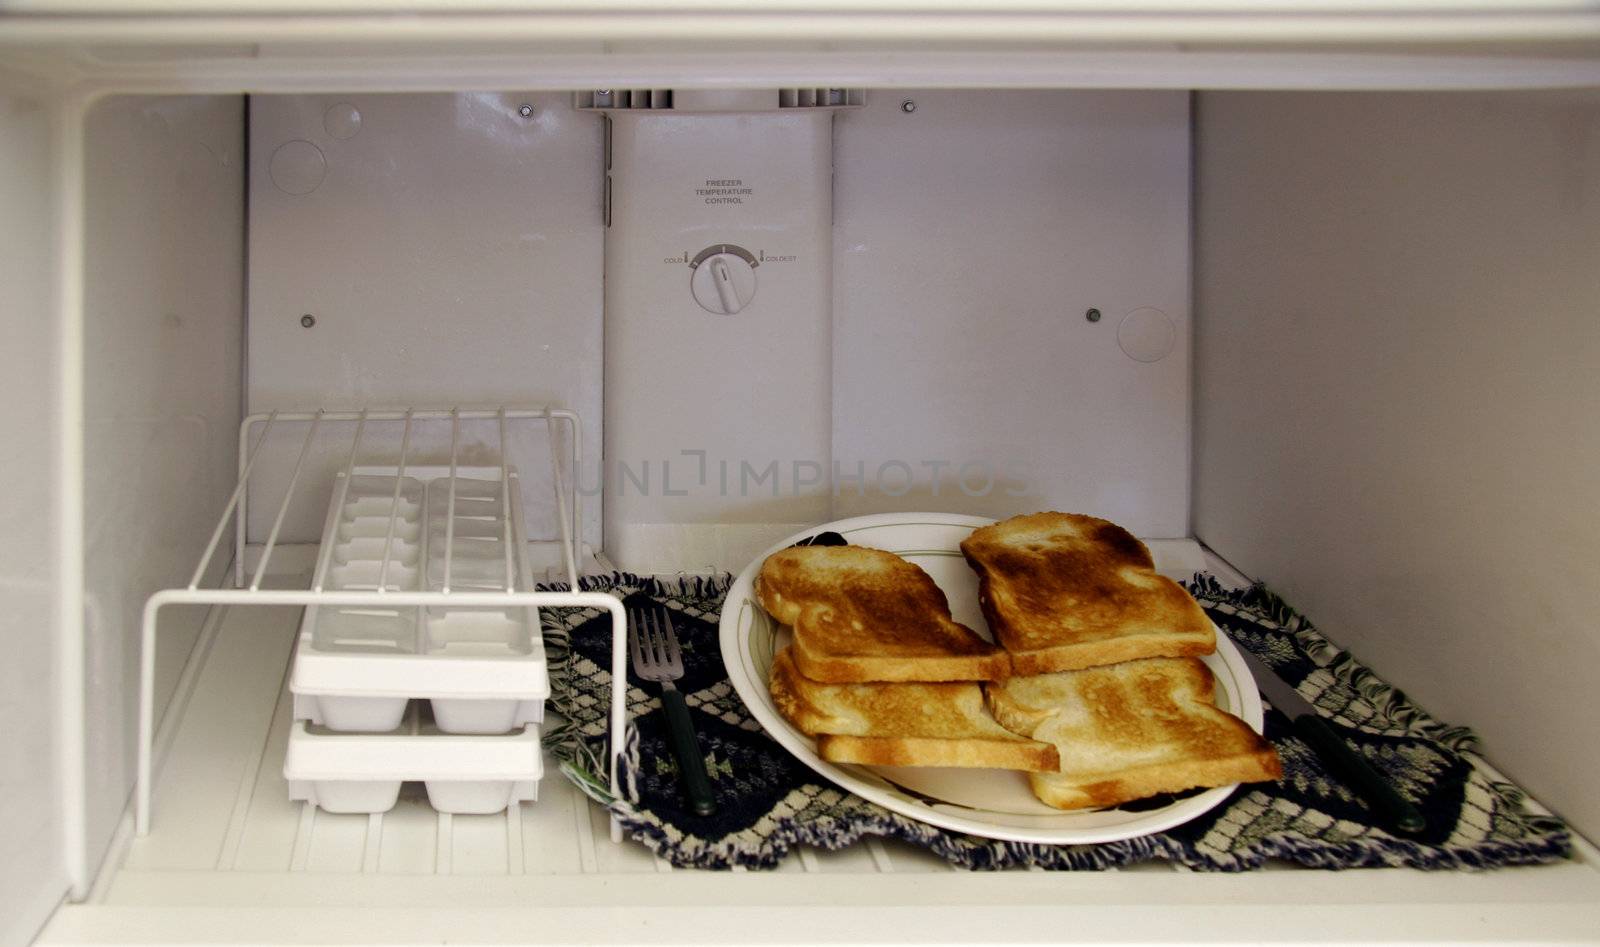 Toast In The Freezer by Imagecom